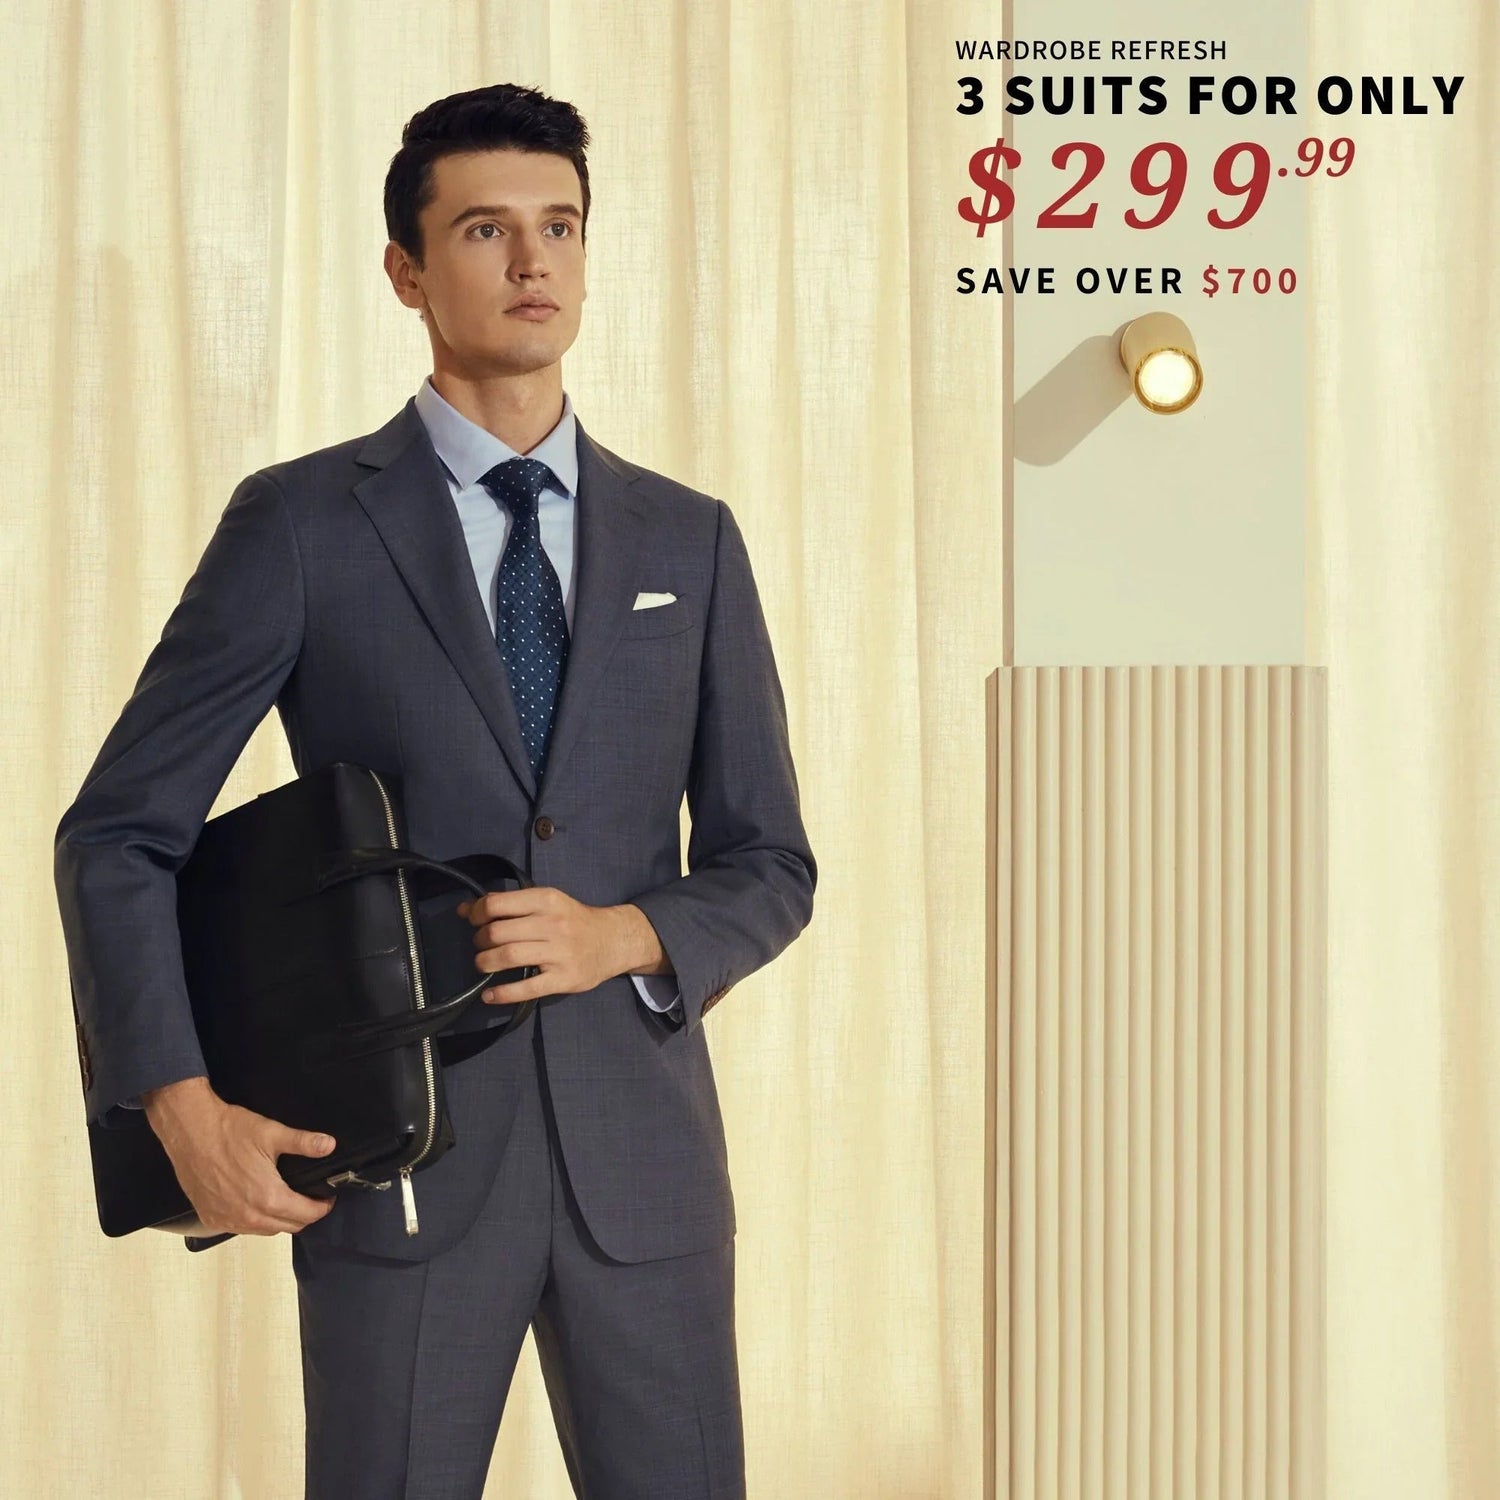 A man posing in a suit with unhemmed pants and a helmet under his arm, featuring an advertisement for the BYOB 3 Suits for $299 online-only sale.